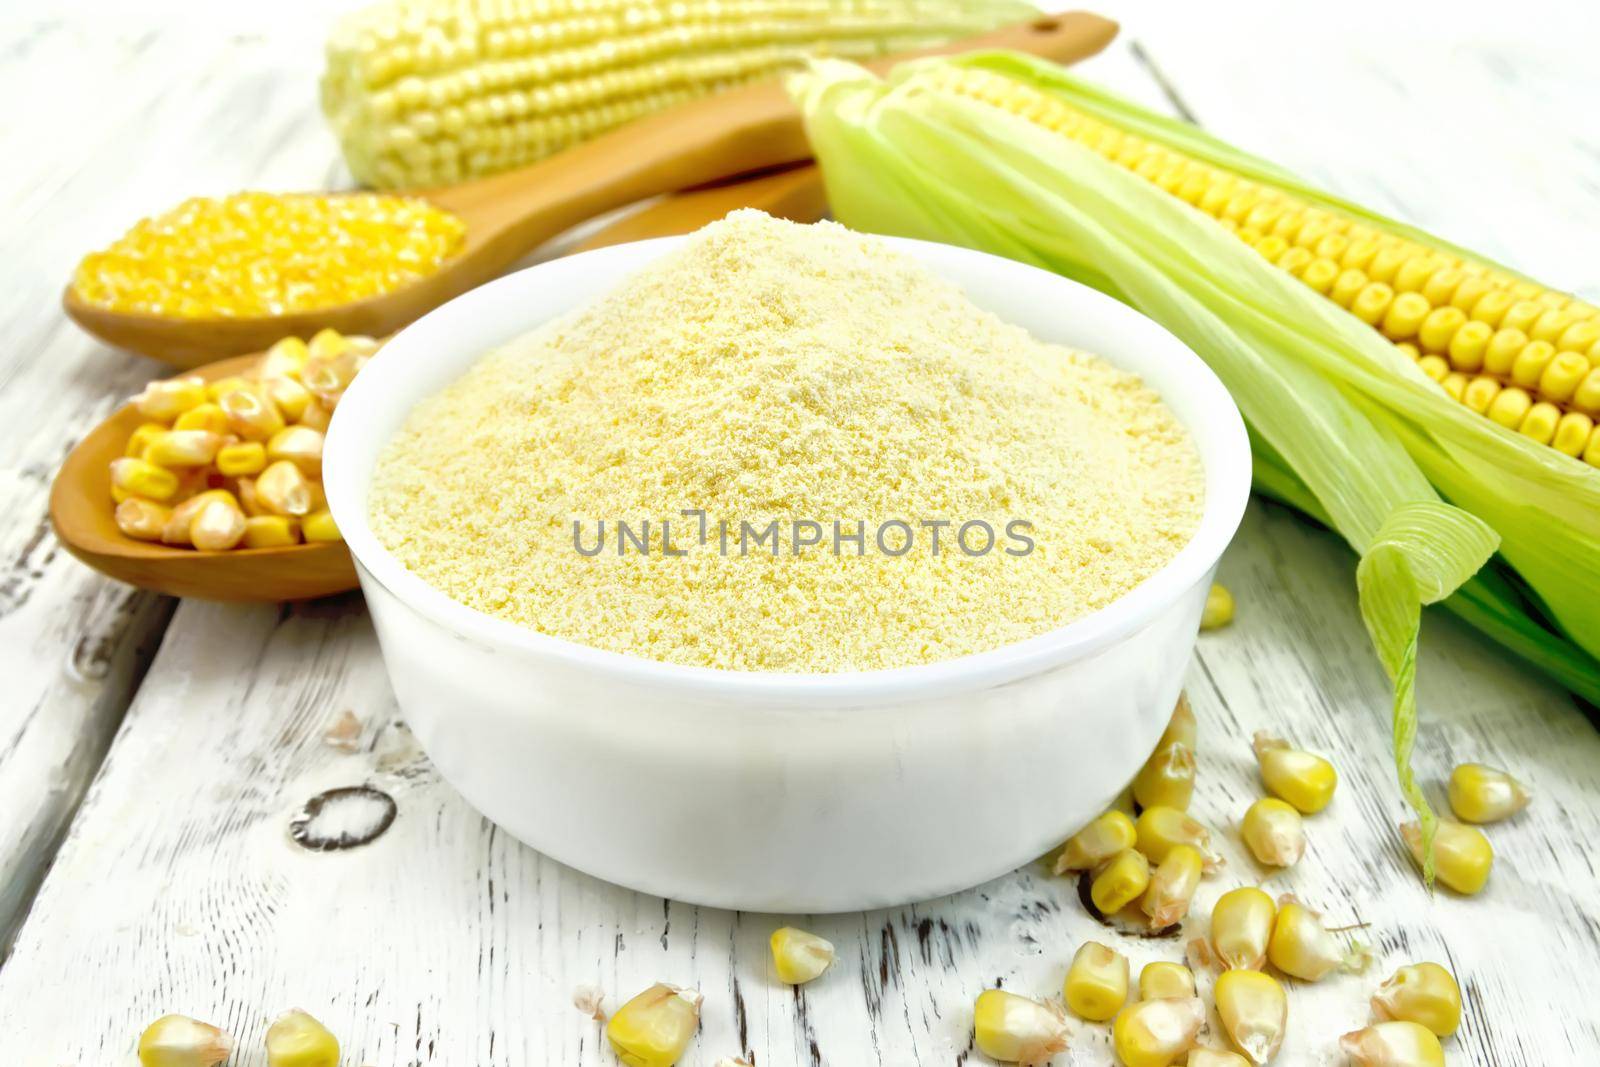 Flour corn in a bowl, groats and grain maize in the spoons, cobs on the background light wooden boards